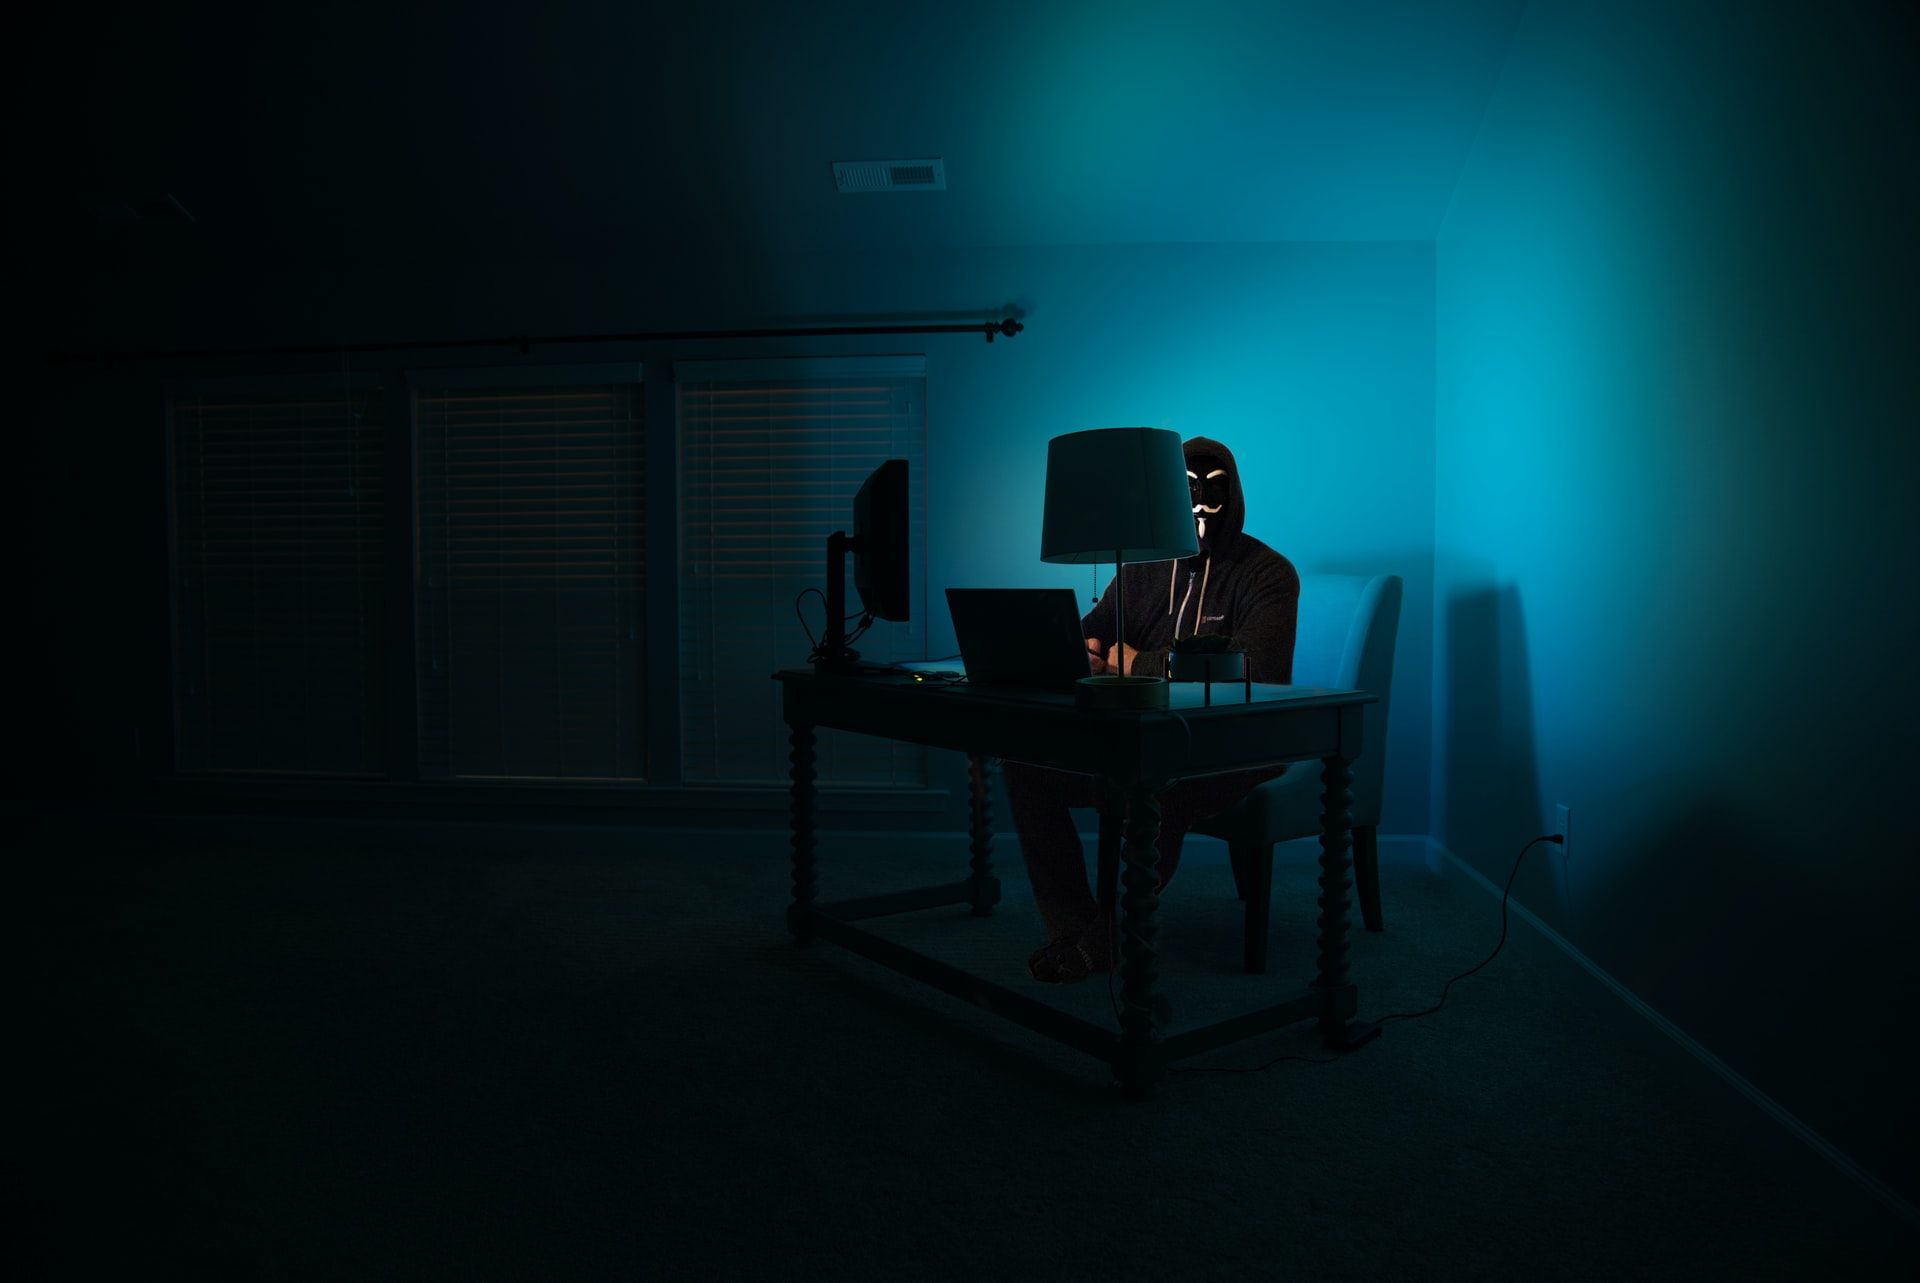 Stereotypical hacker in a dark room